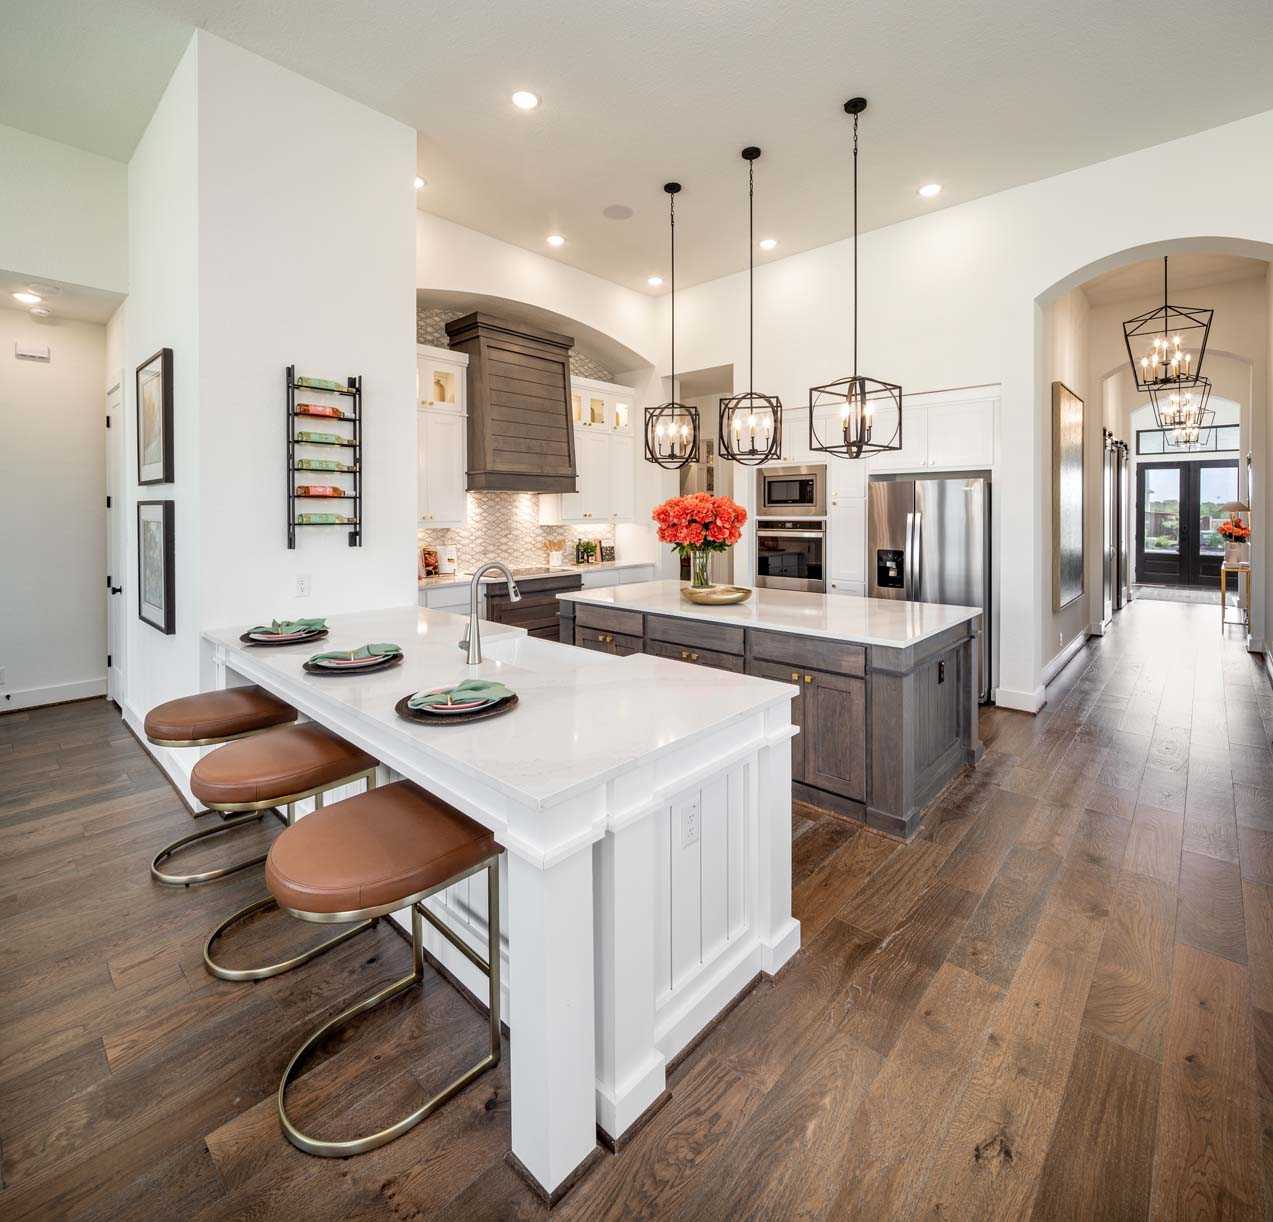 Modern kitchen interior in New Braunfels with a central island, bar stools, stainless steel appliances, and pendant lighting.